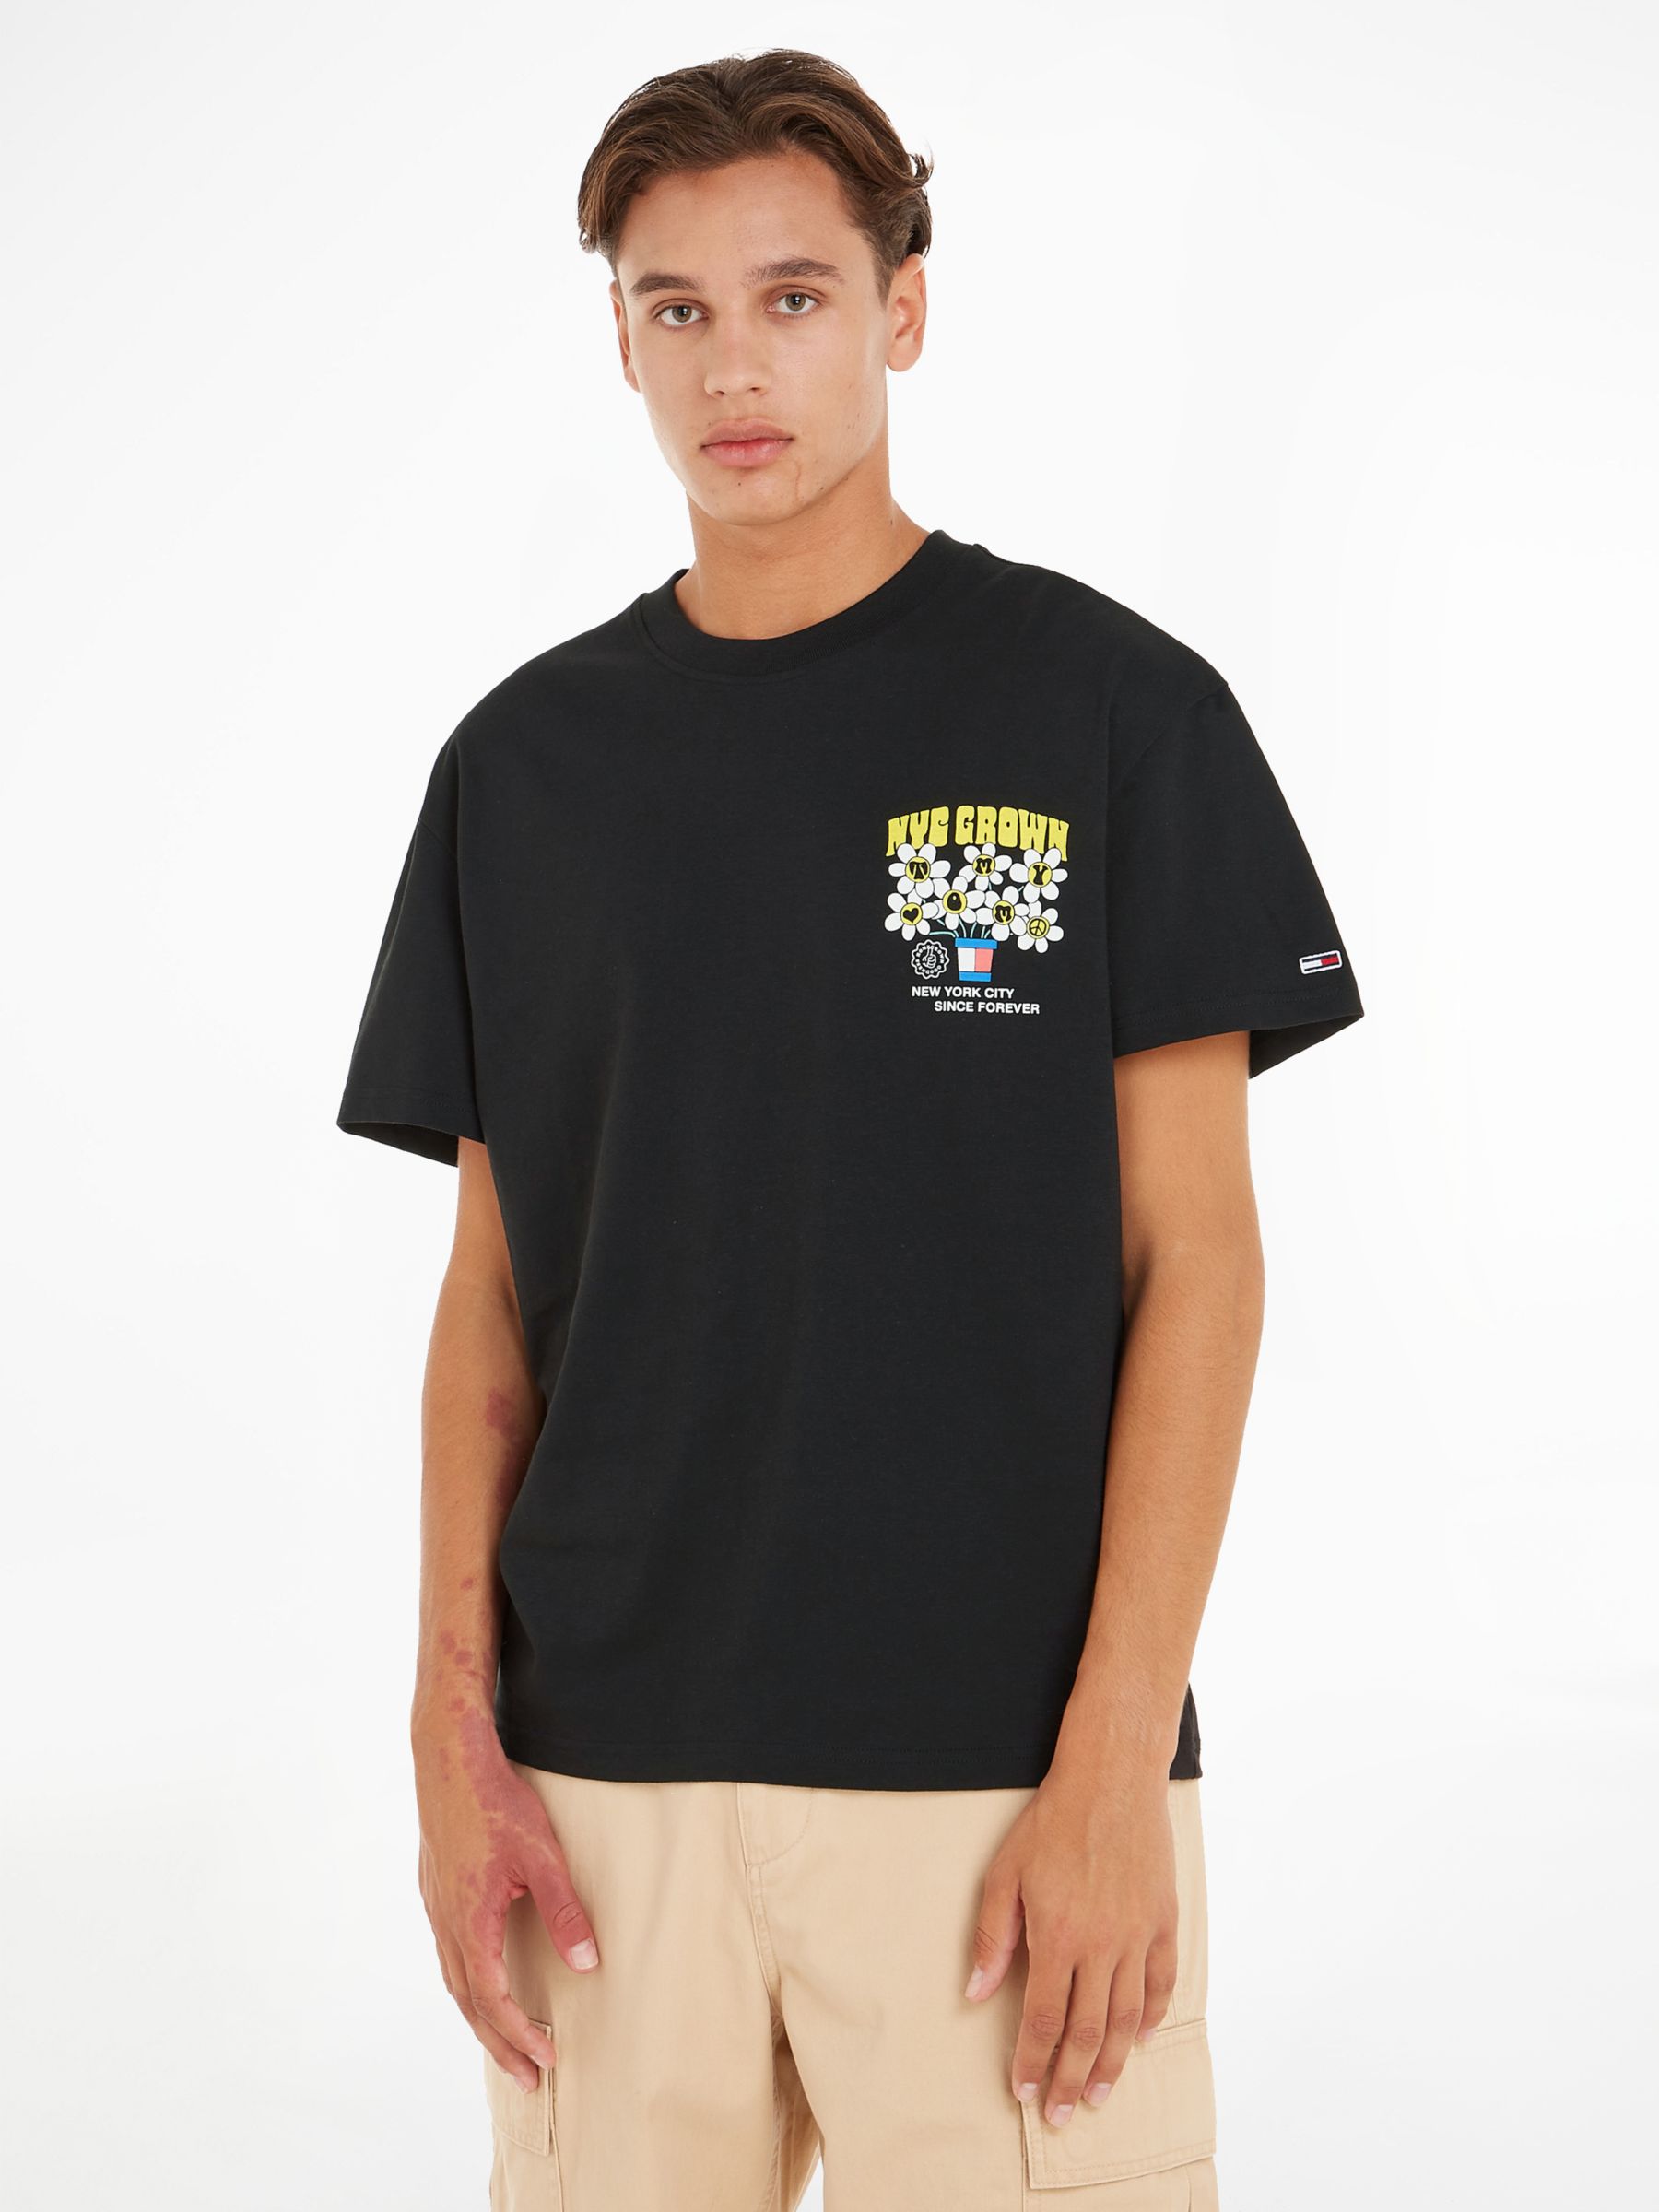 Tommy Jeans NYC Homegrown Daisy T-Shirt, Black at John Lewis & Partners